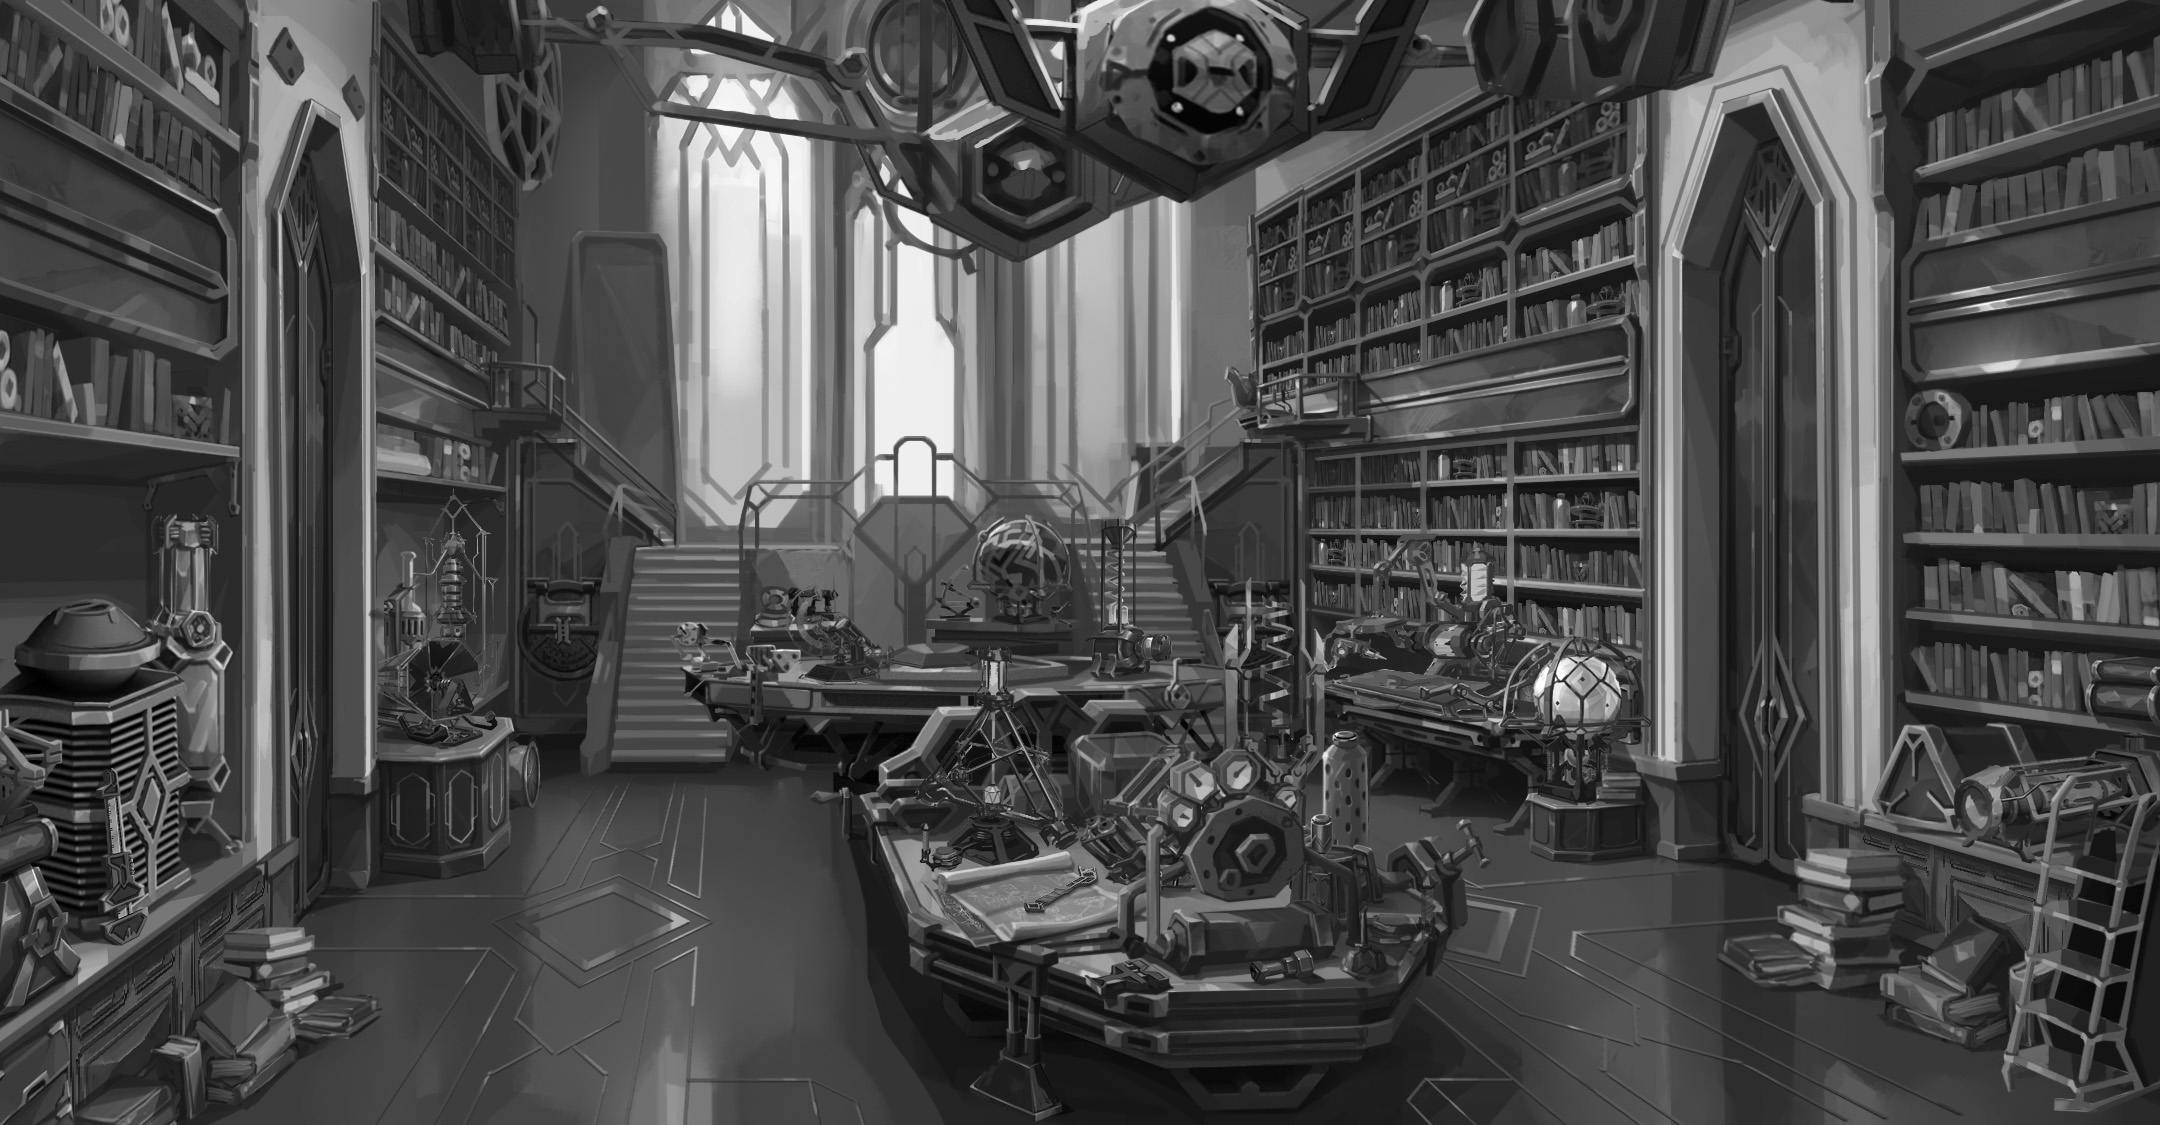 A black and white image of a library, with intricate contraptions lying about and hanging from the ceiling.